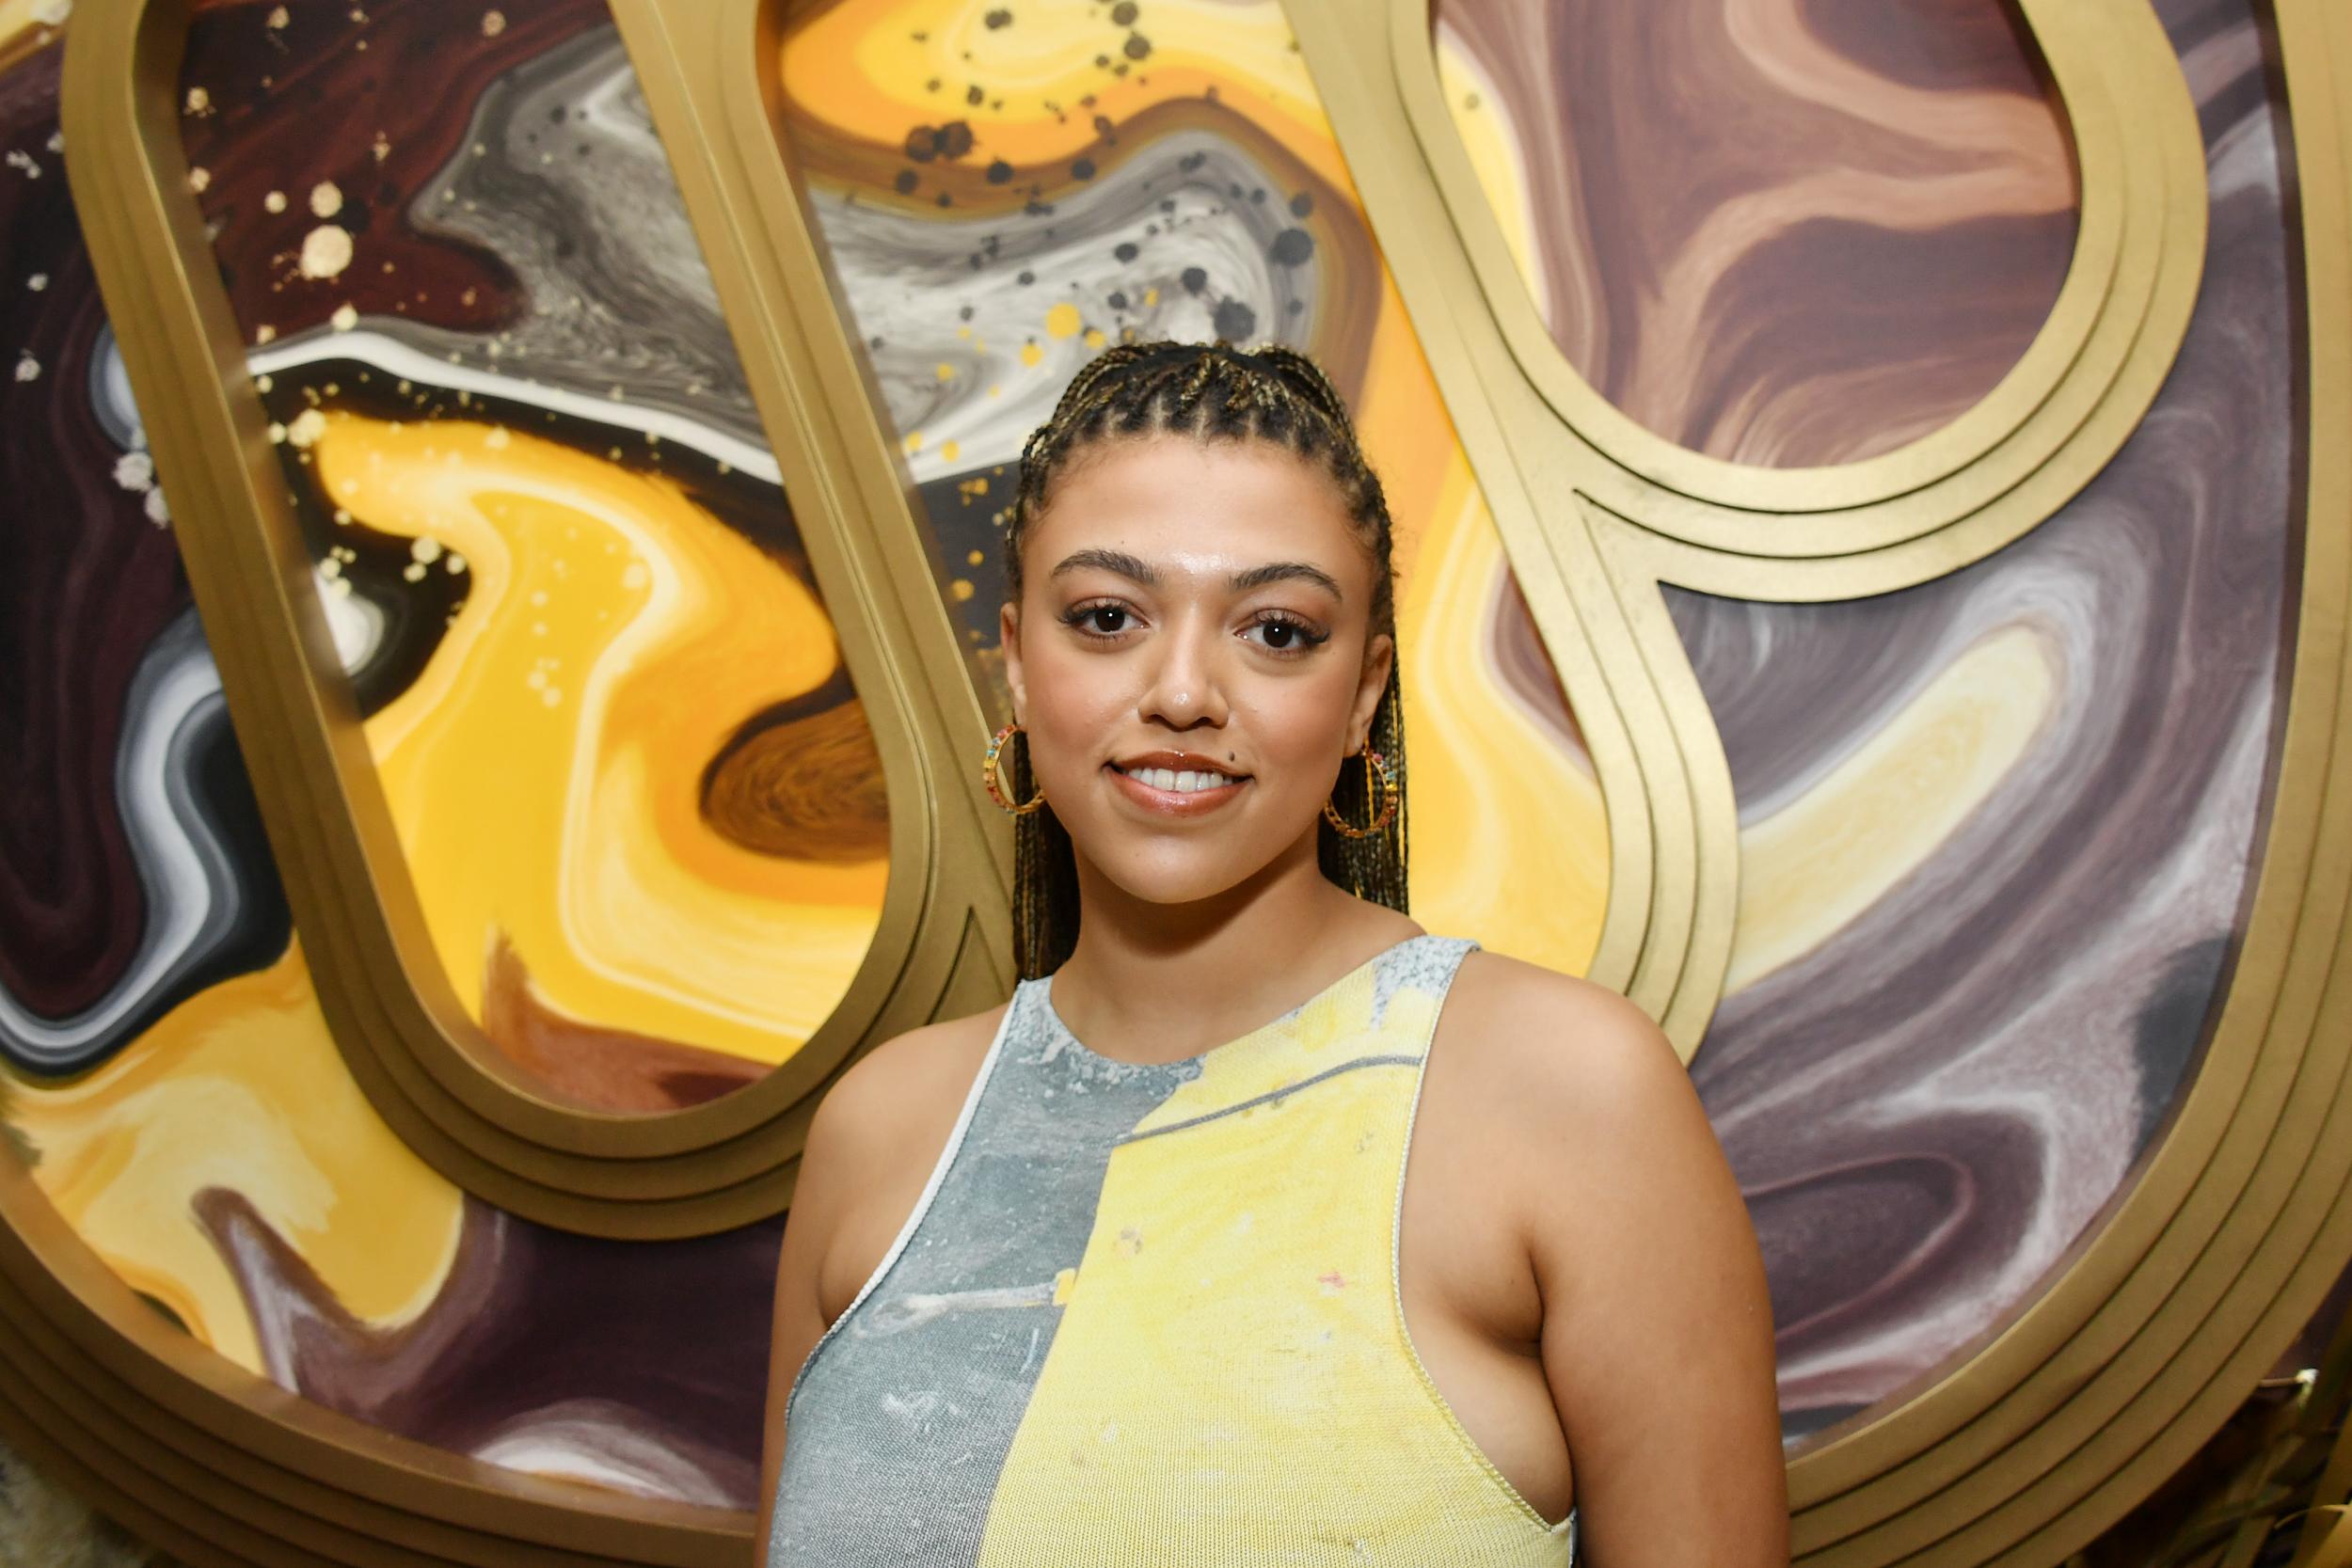 Mahalia attends the Warner Music Group pre-Grammy party in 2020